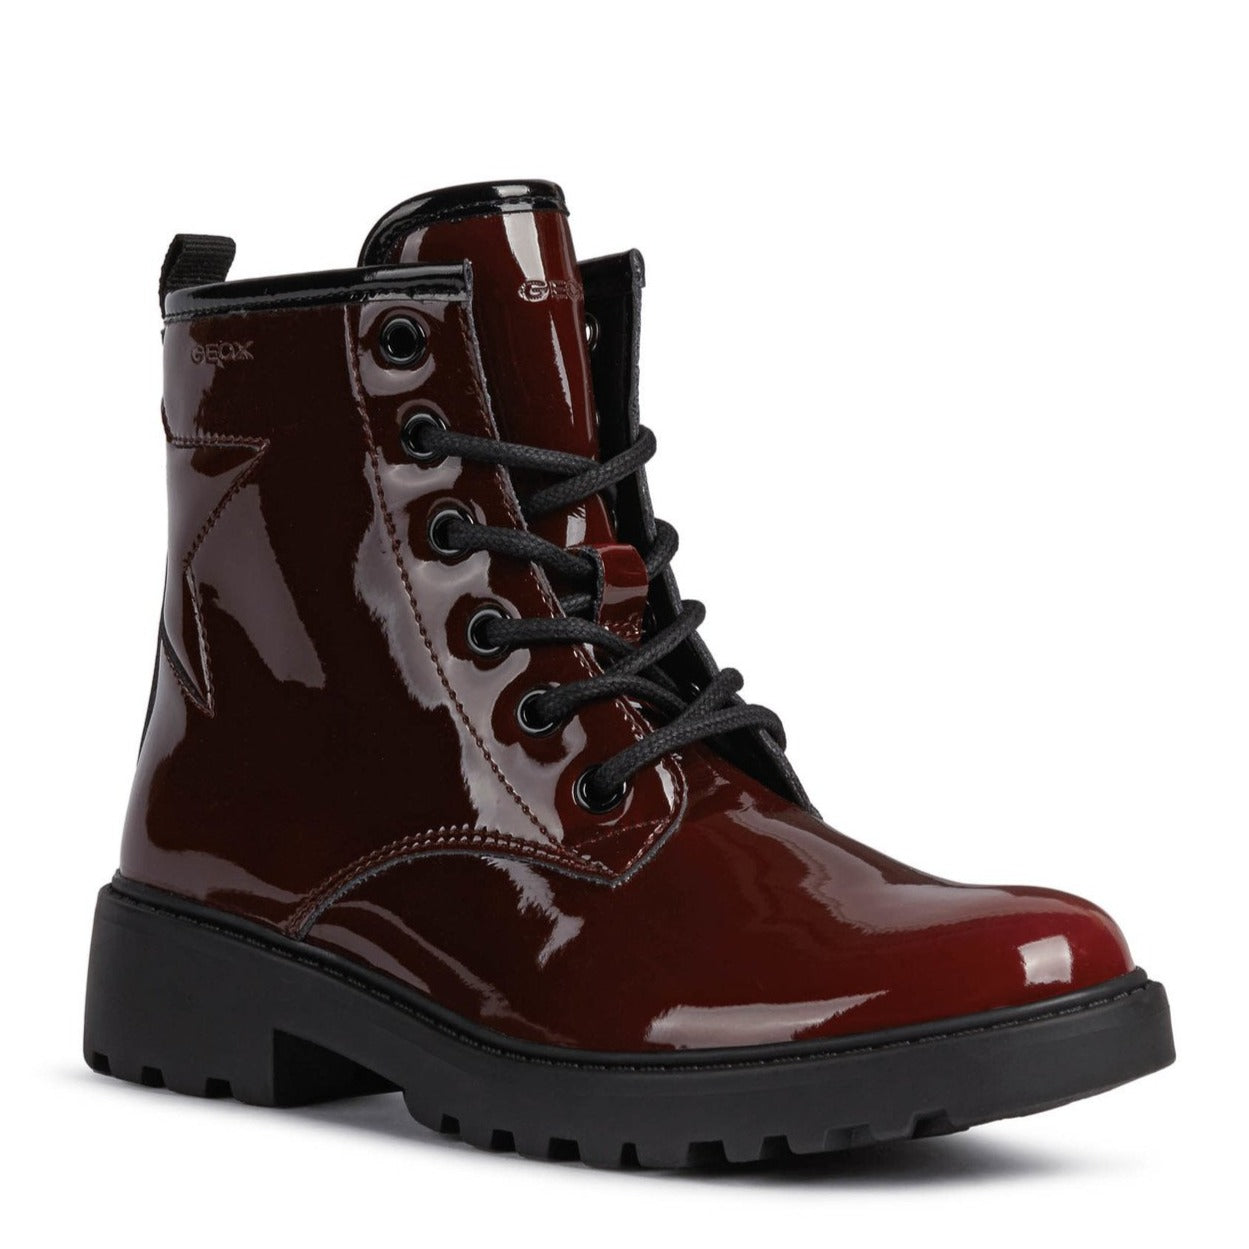 Casey Zipped Lace Up Boot in Bordeaux Patent